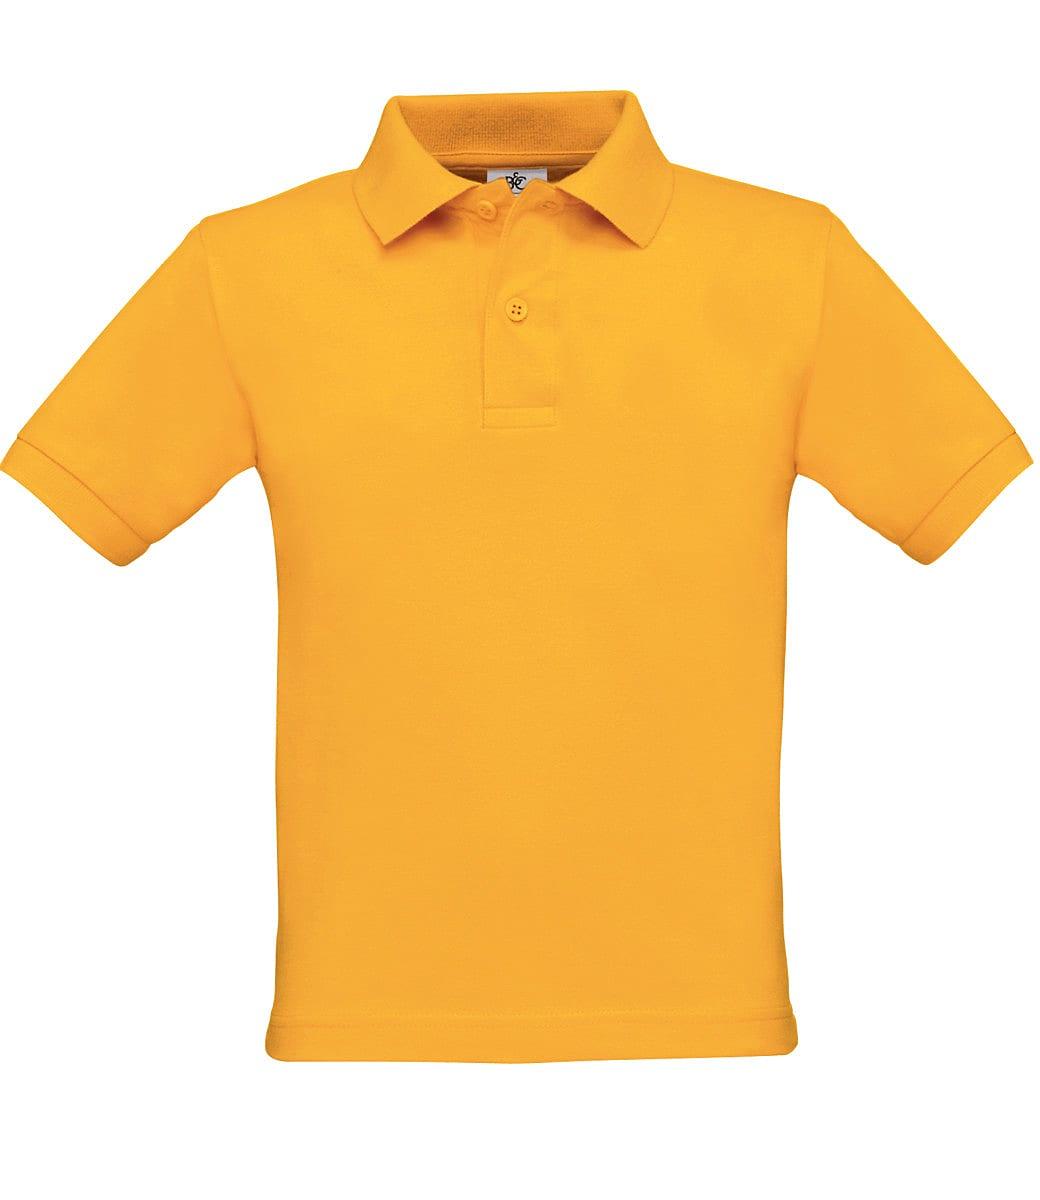 B&C Childrens Safran Polo Shirt in Gold (Product Code: PK486)